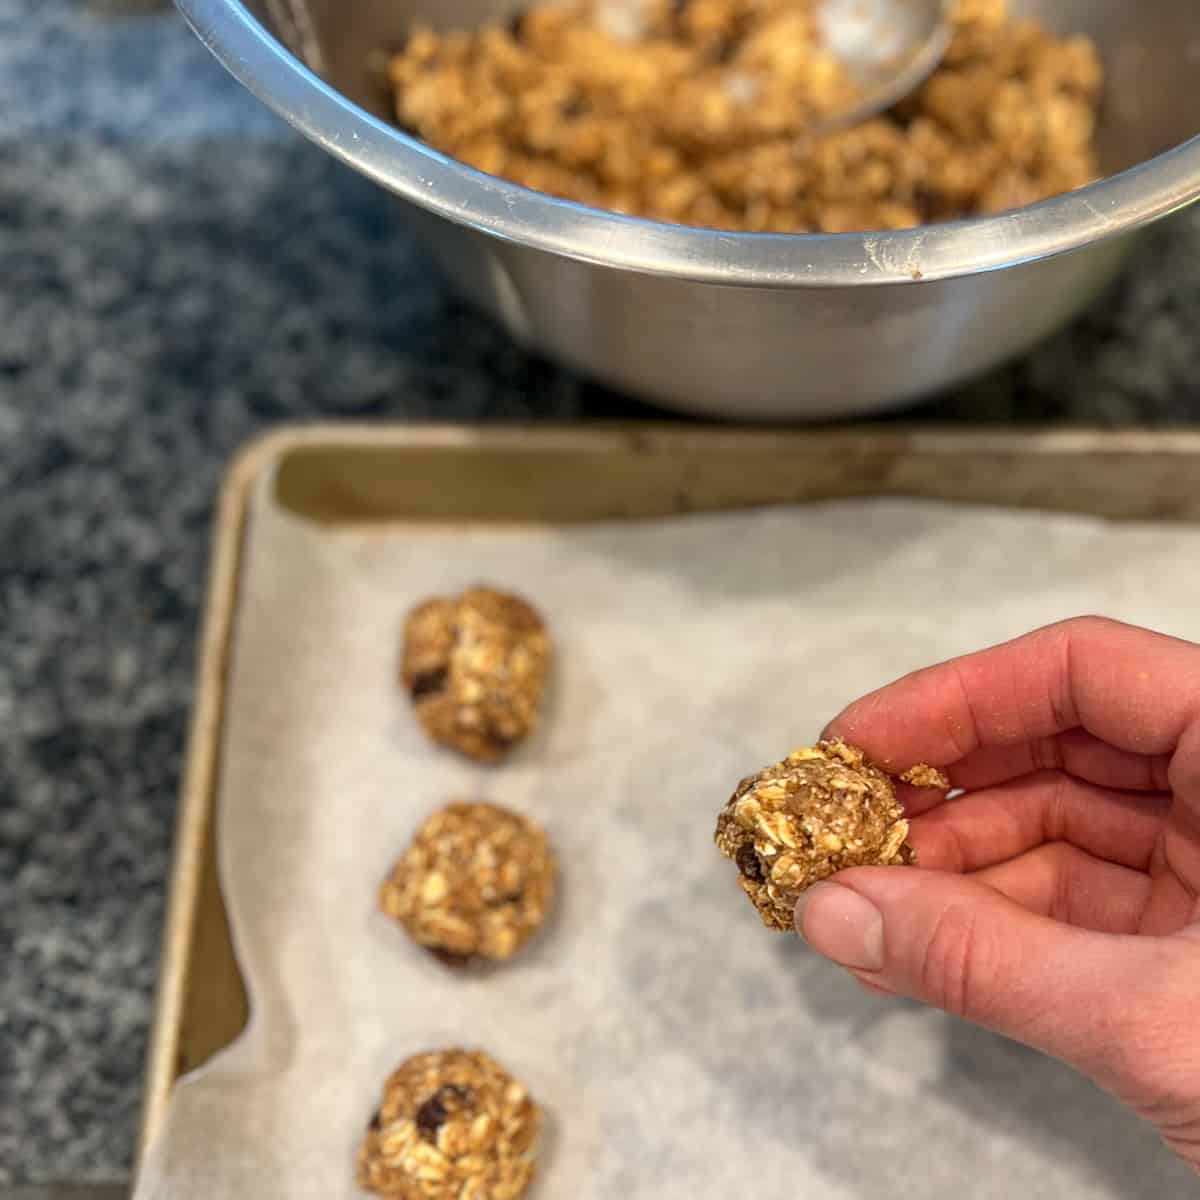 cookie dough being formed into small round balls on a parchment-lined baking sheet